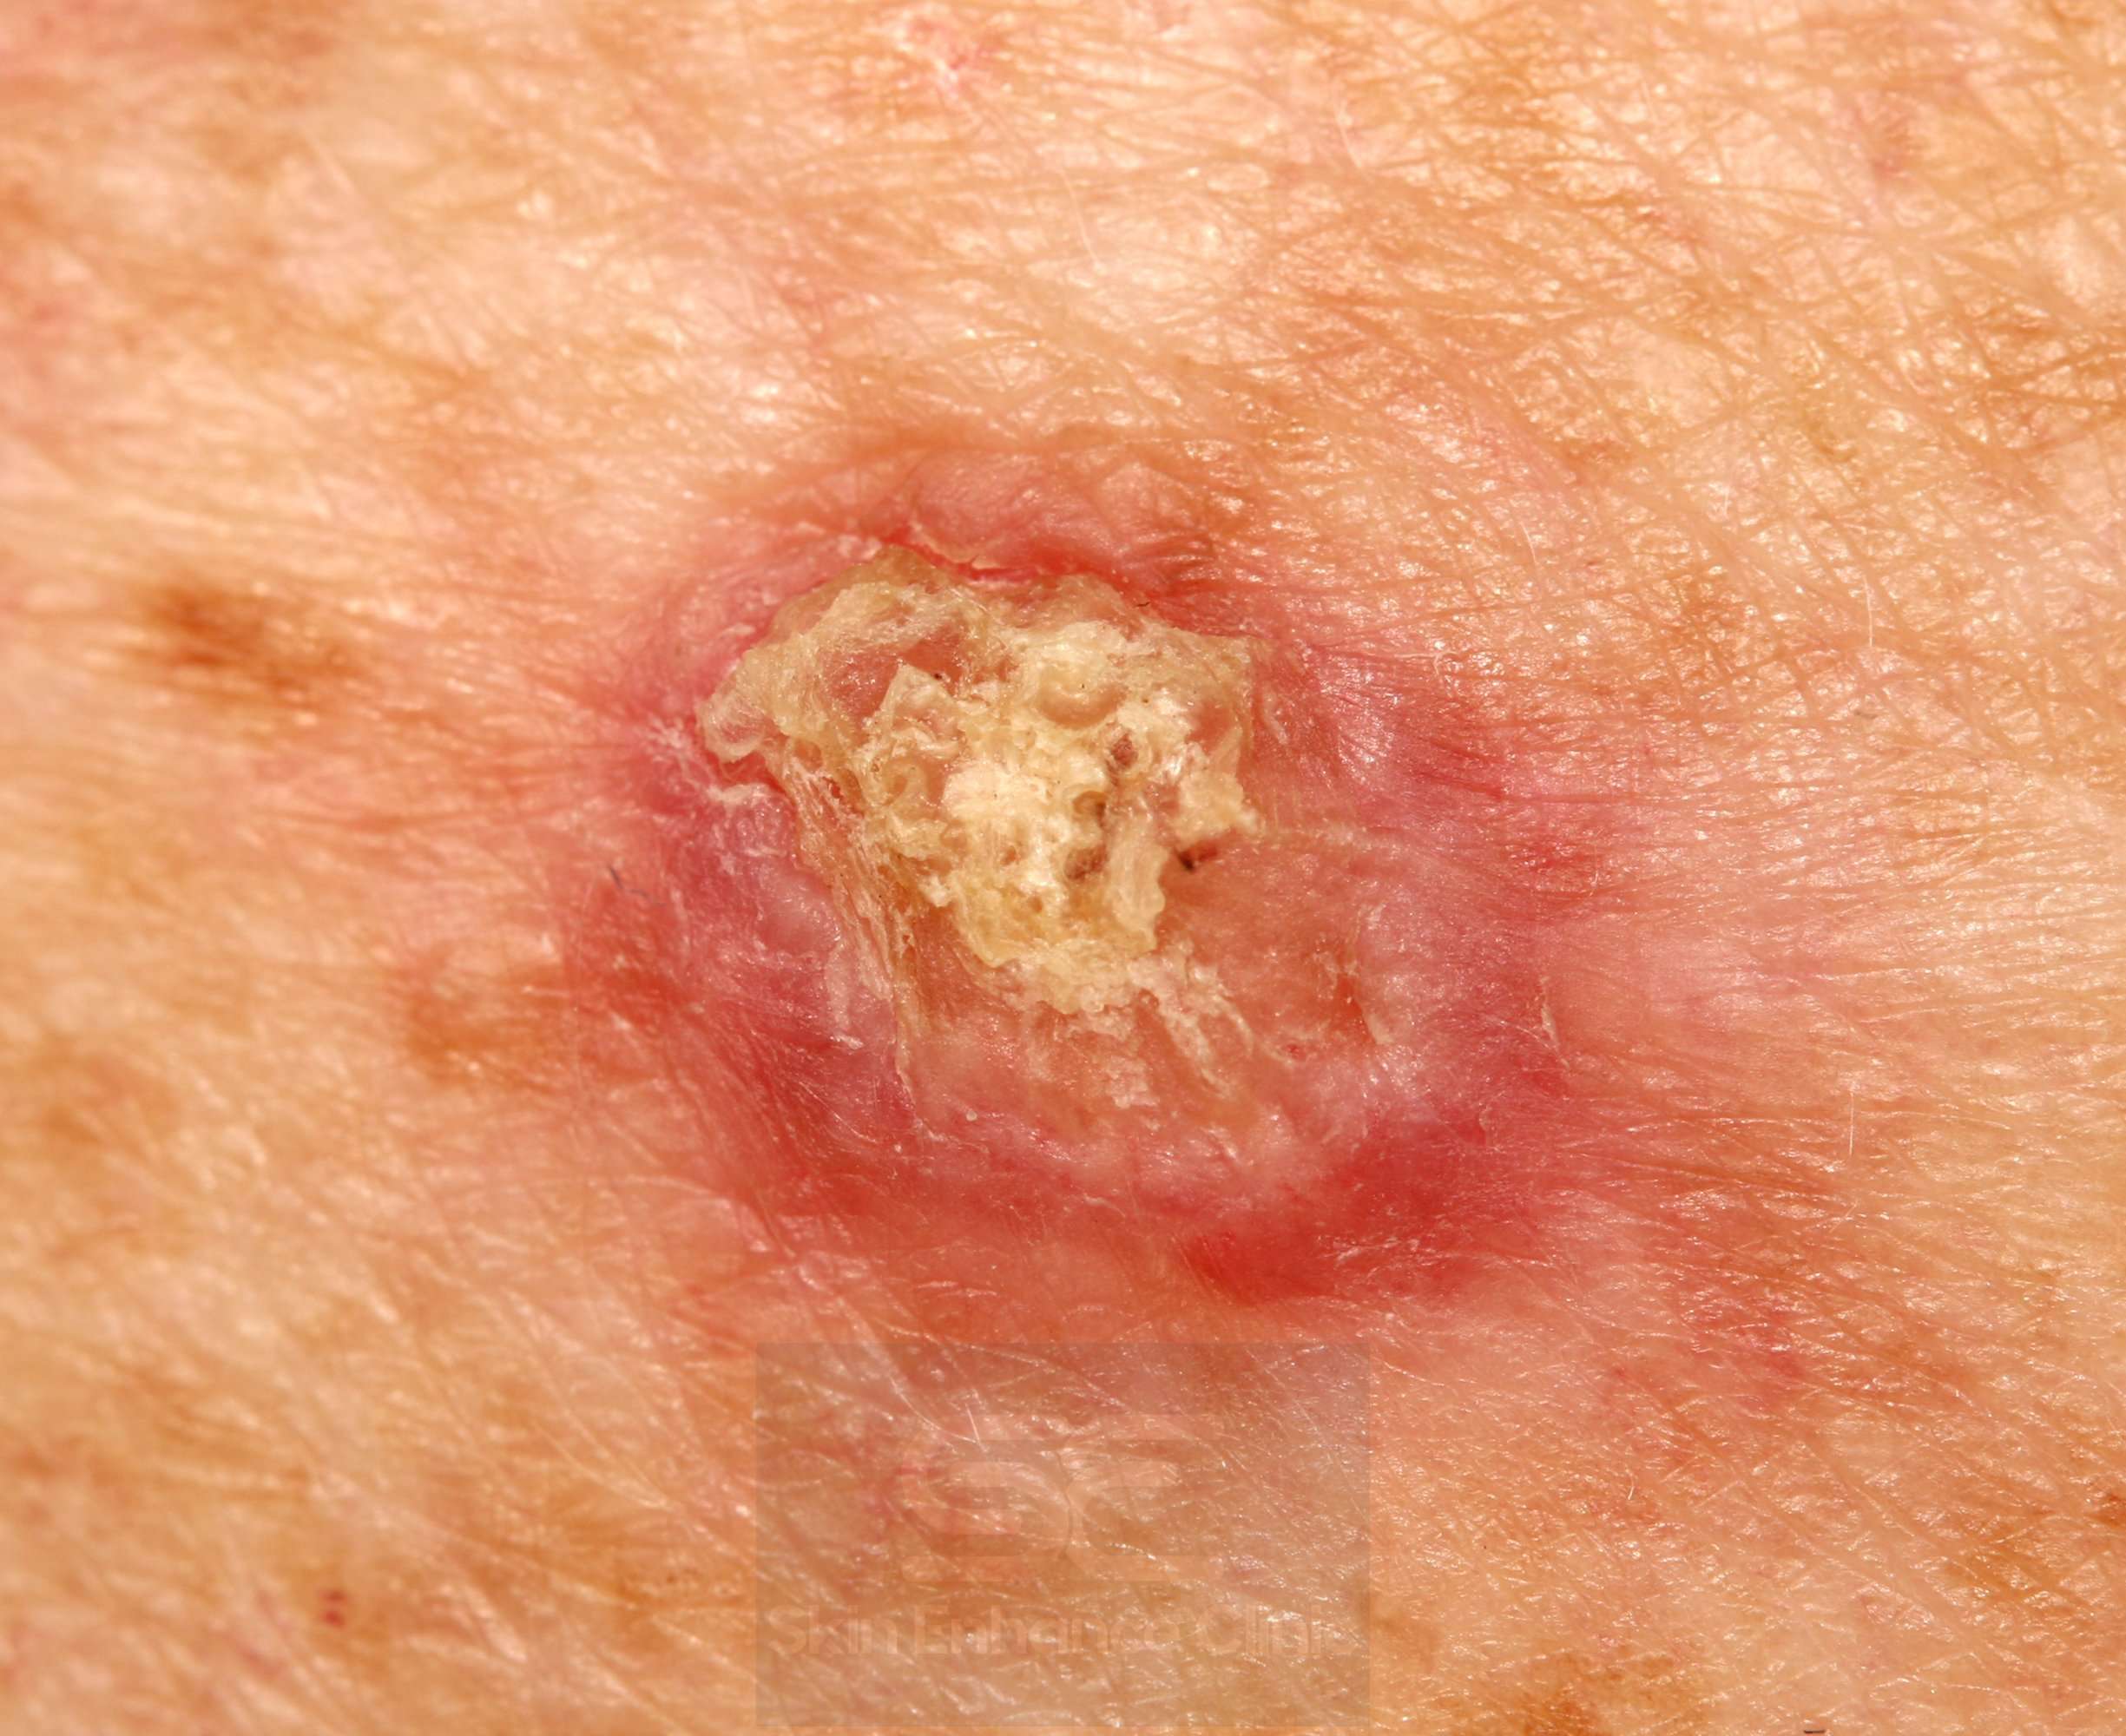 Skin Cancer and Precancerous Skin Lesions: What you need ...